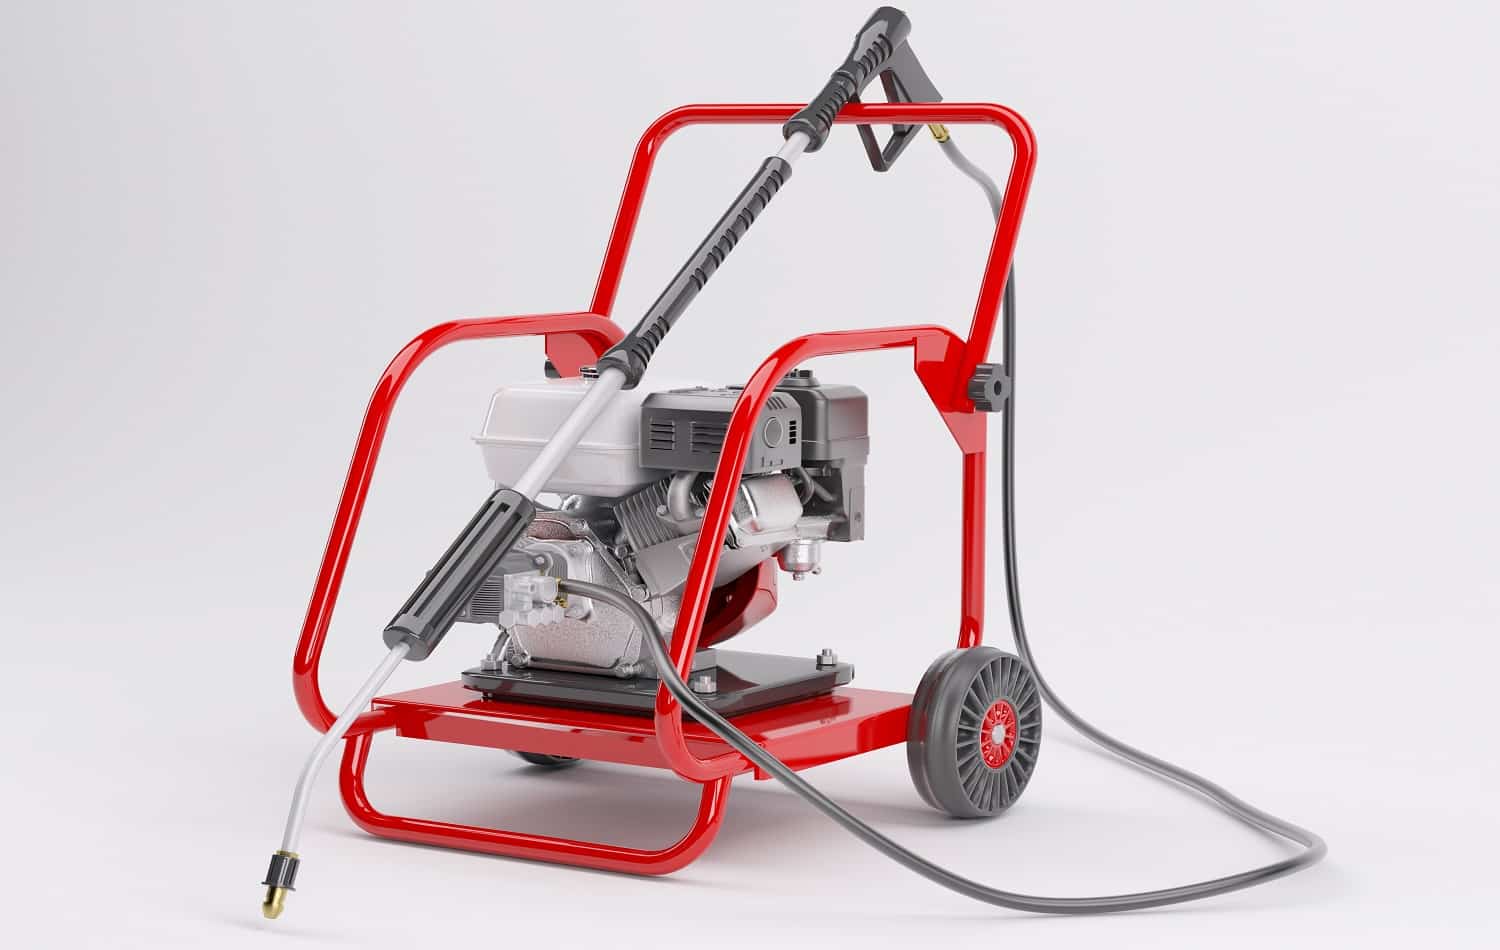 3d render of a pressure washer